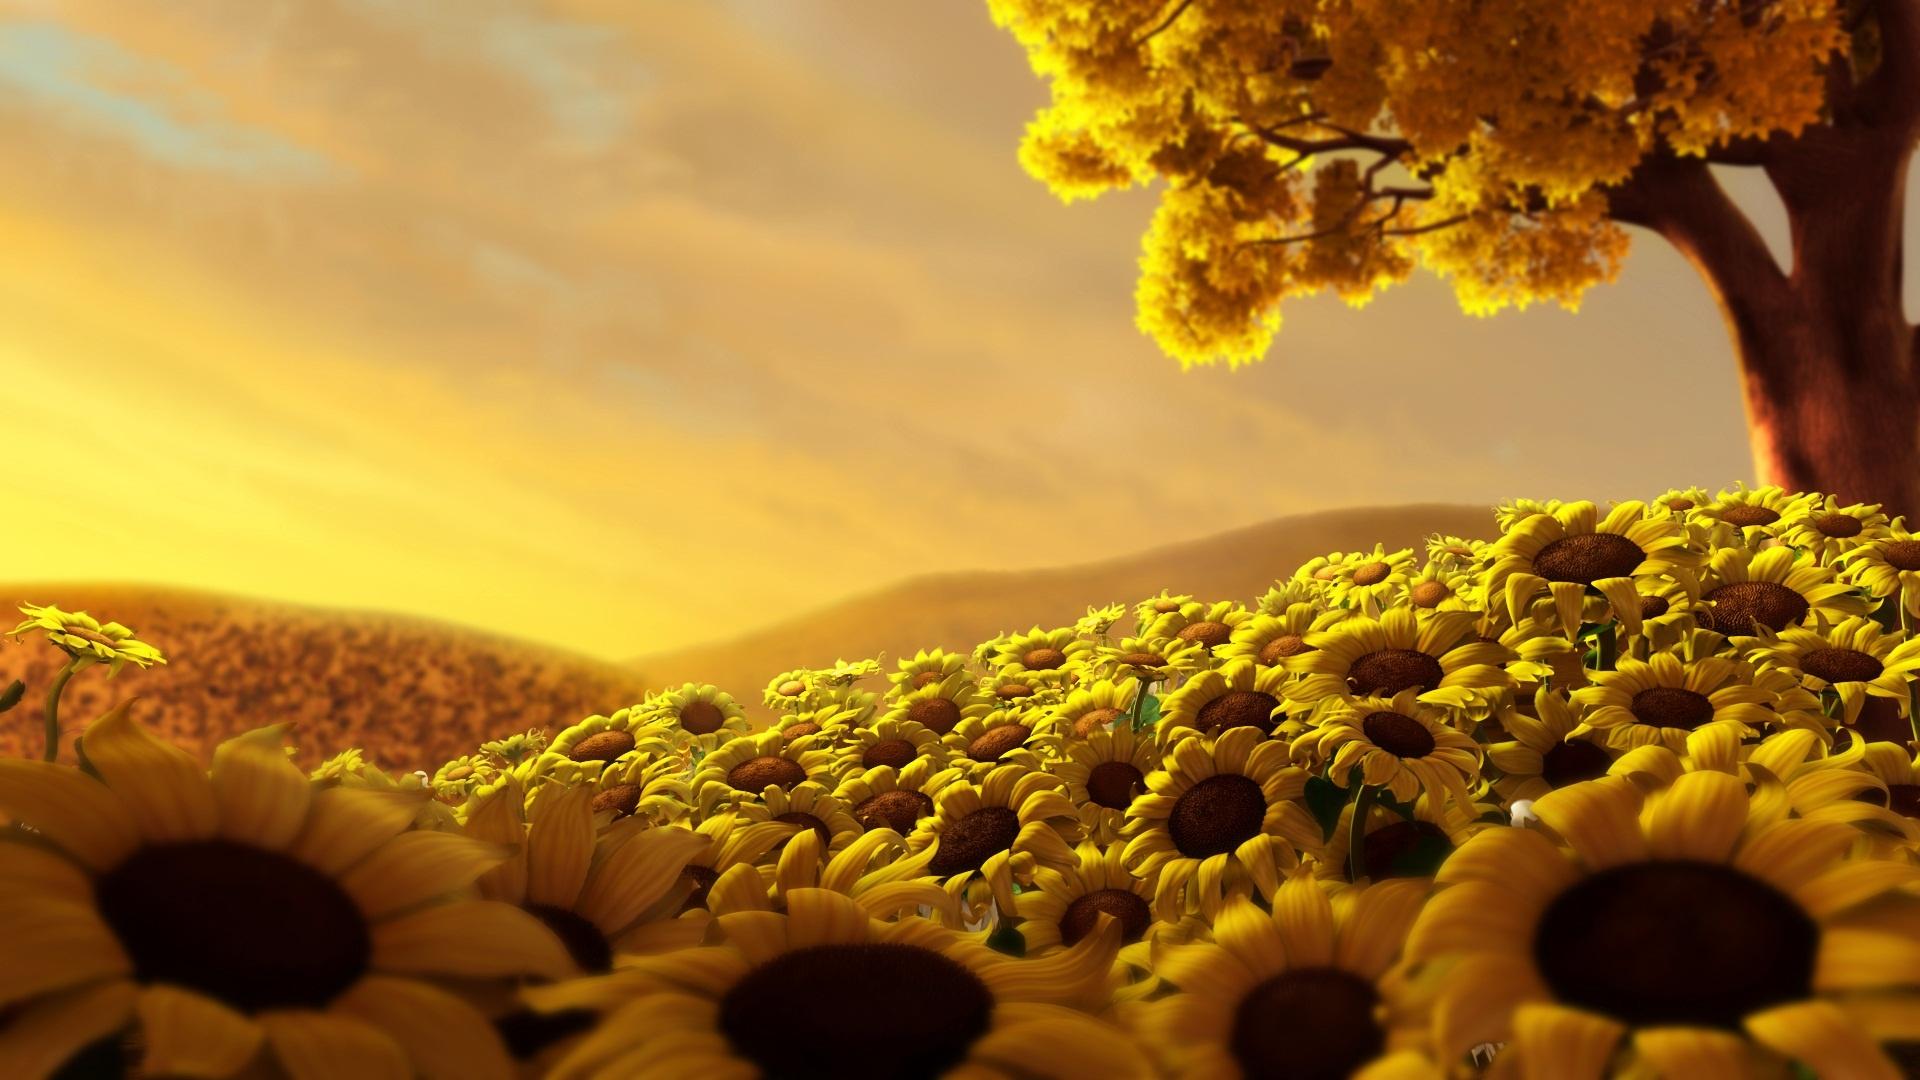 Sunflowers World HD 1920x1080 Wallpapers, 1920x1080 Wallpapers